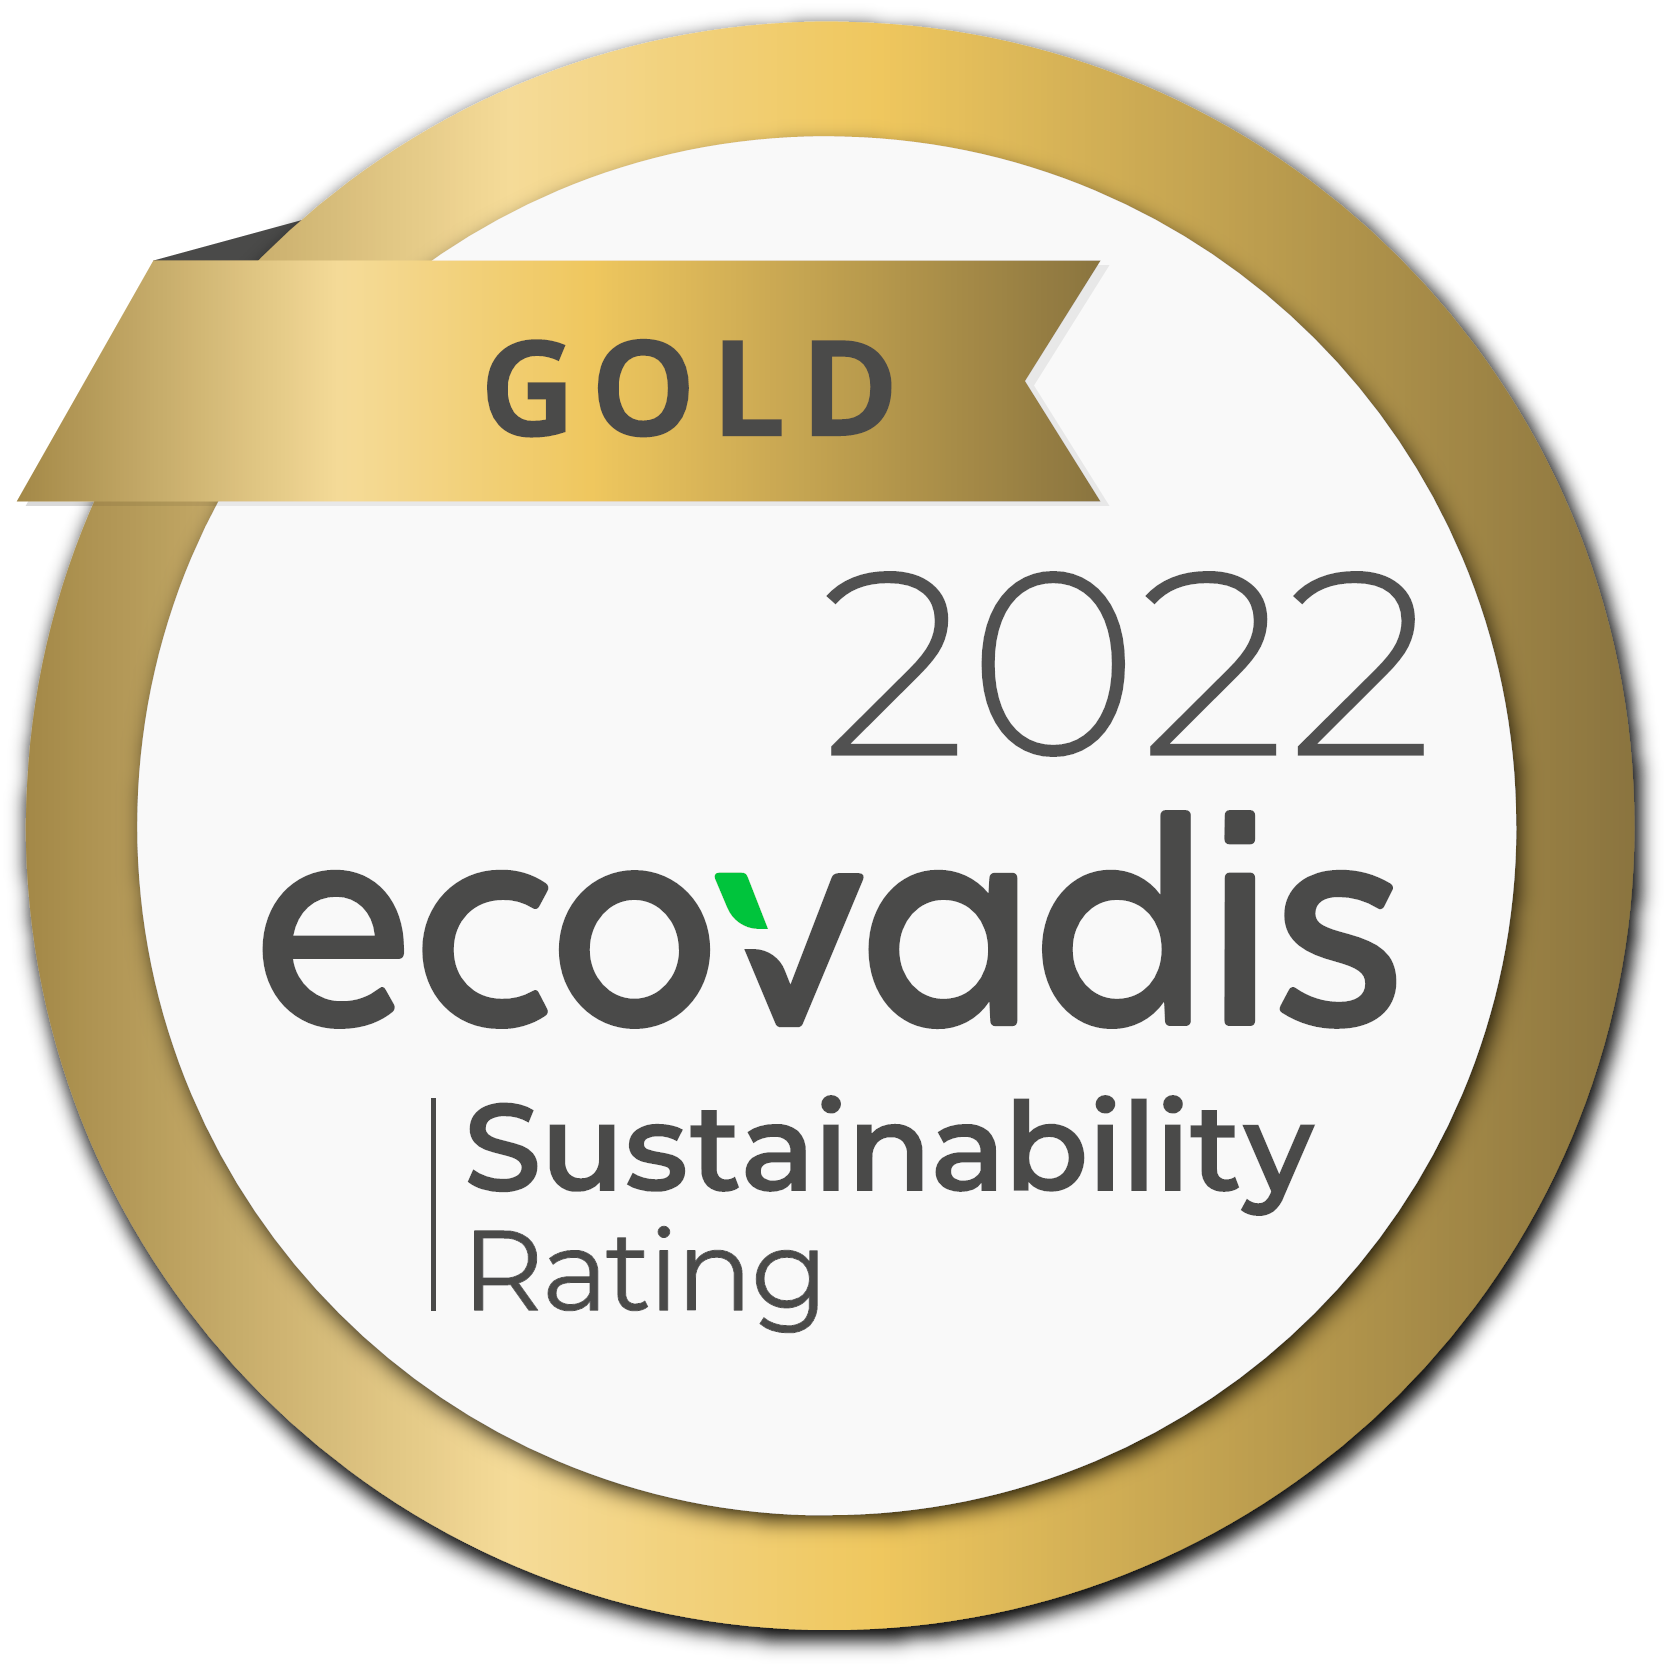 ALD Automotive Romania was awarded with the Gold medal by Ecovadis